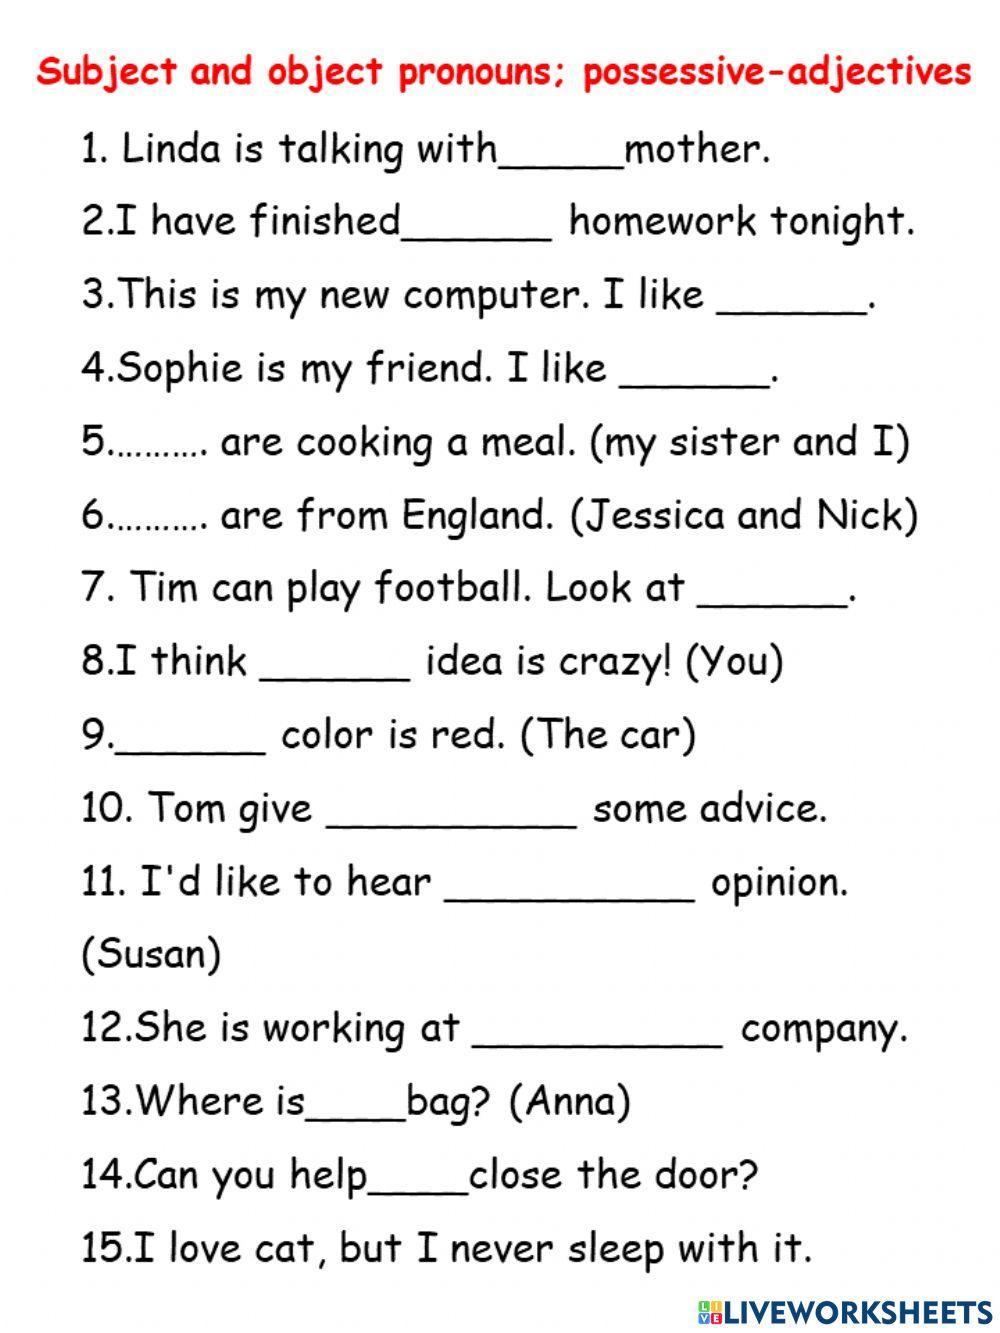 subject-and-object-pronouns-possessive-adjectives-worksheet-live